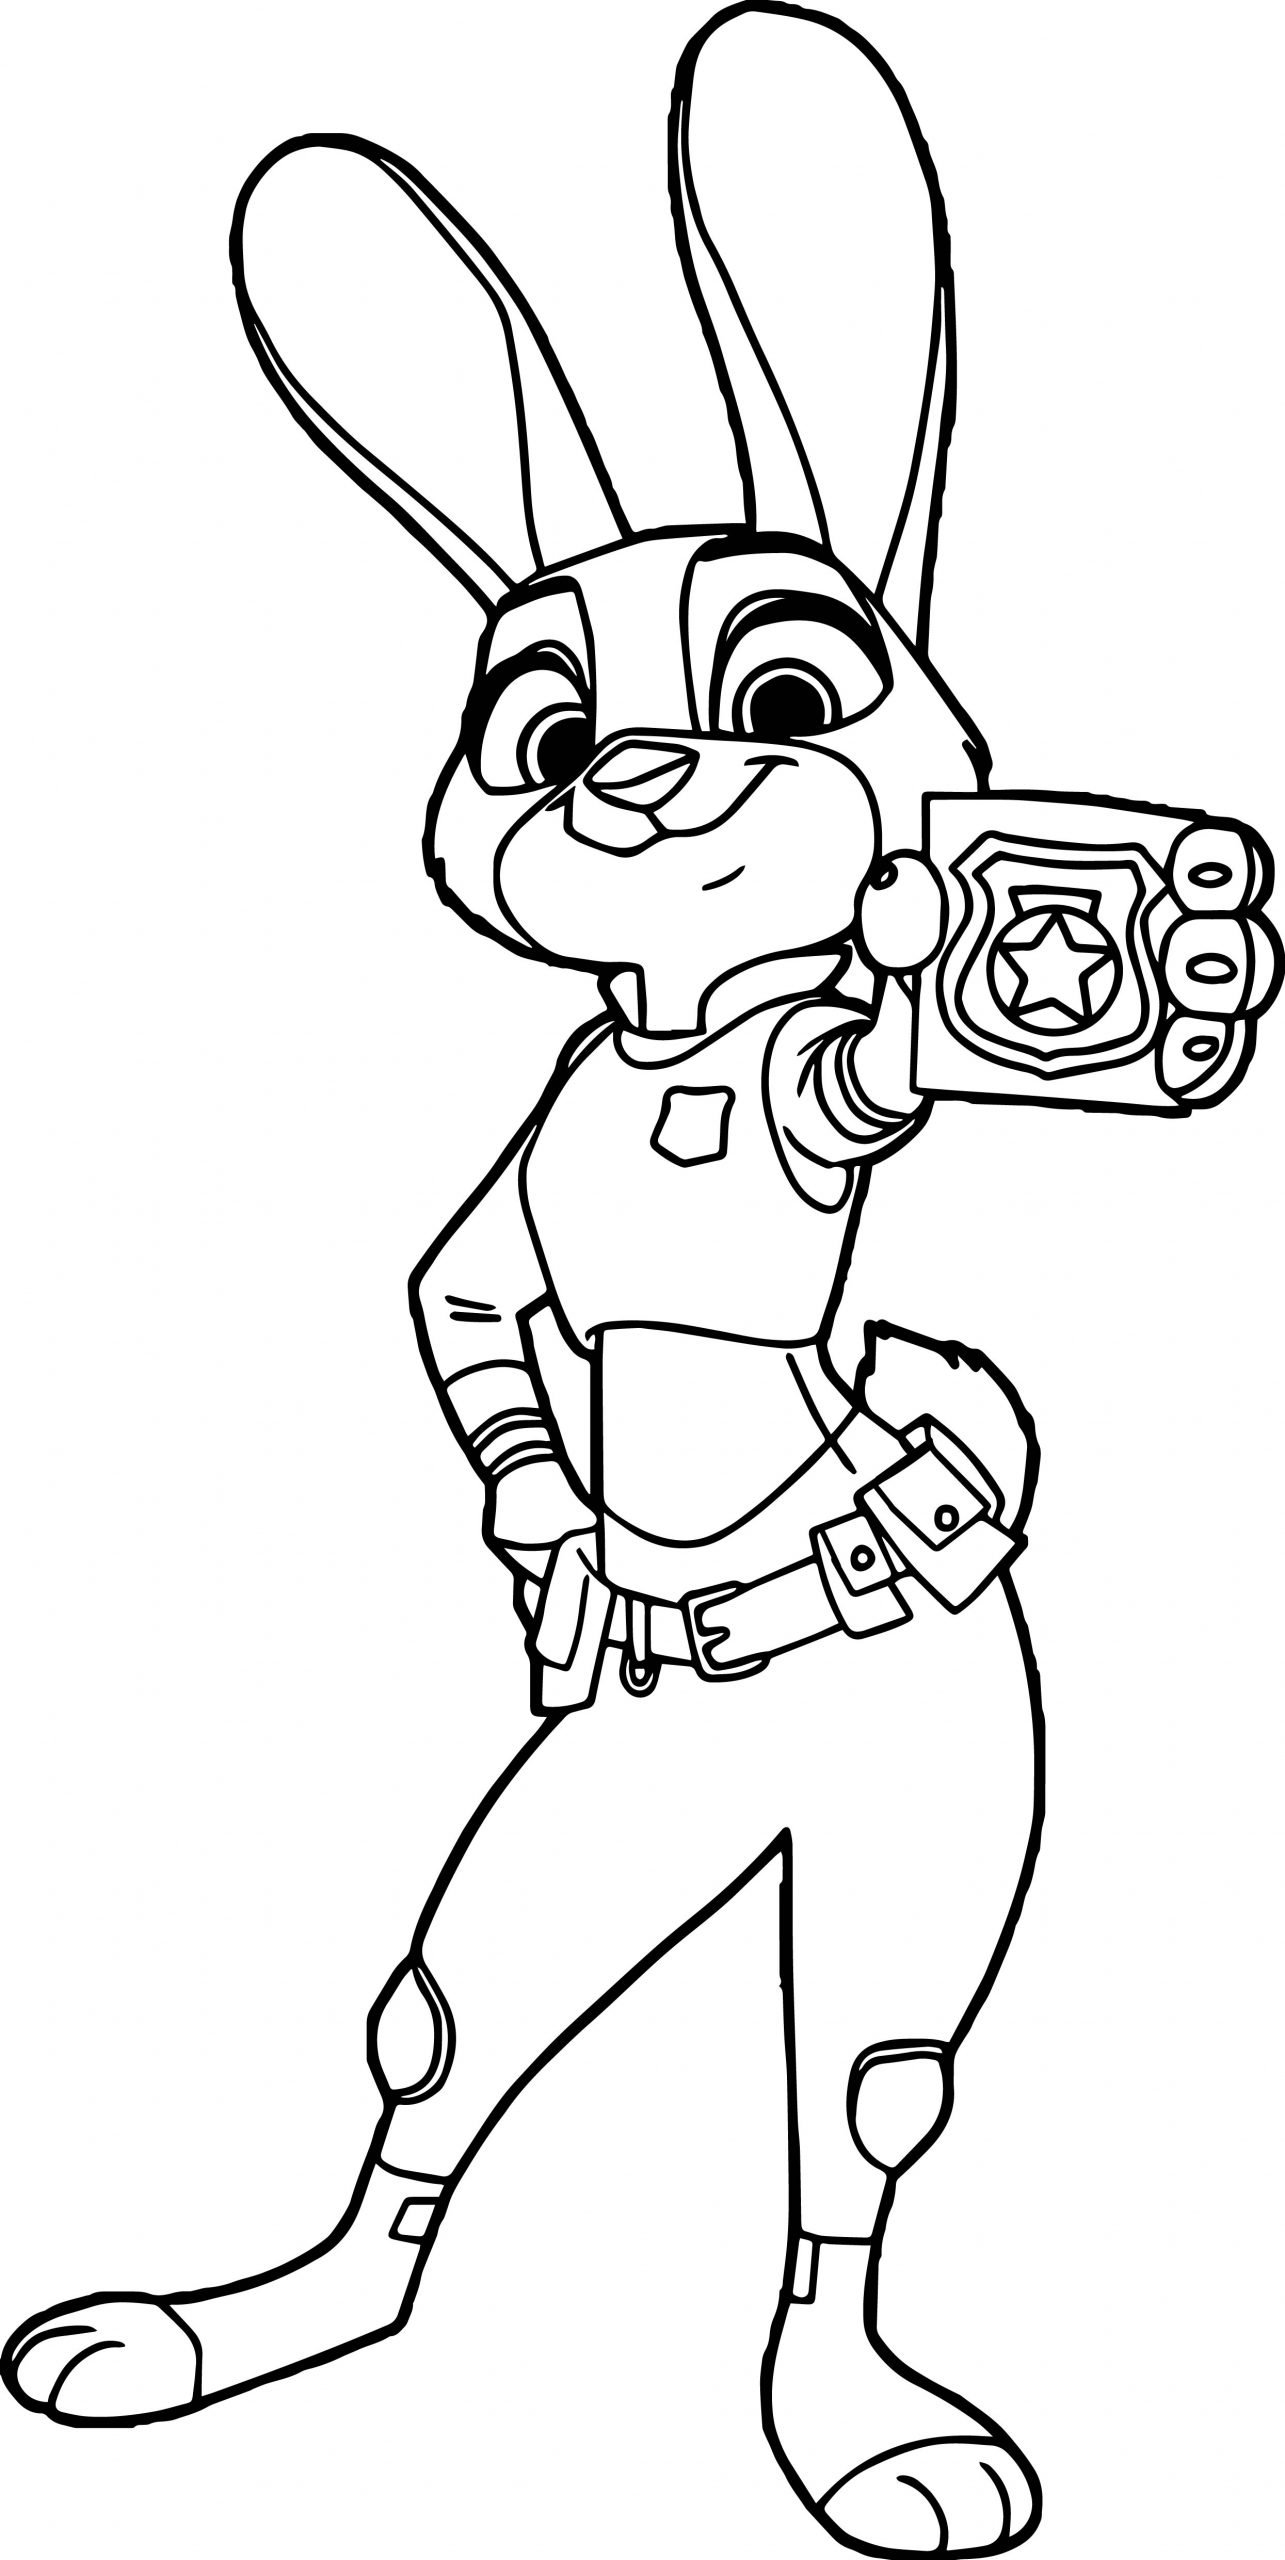 Coloring Pages : Zootopia Coloring Pages Free Coloring Pages Printable‚  Zootopia Coloring Pages Printable Free‚ Zootopia Coloring Pages plus  Coloring Pagess